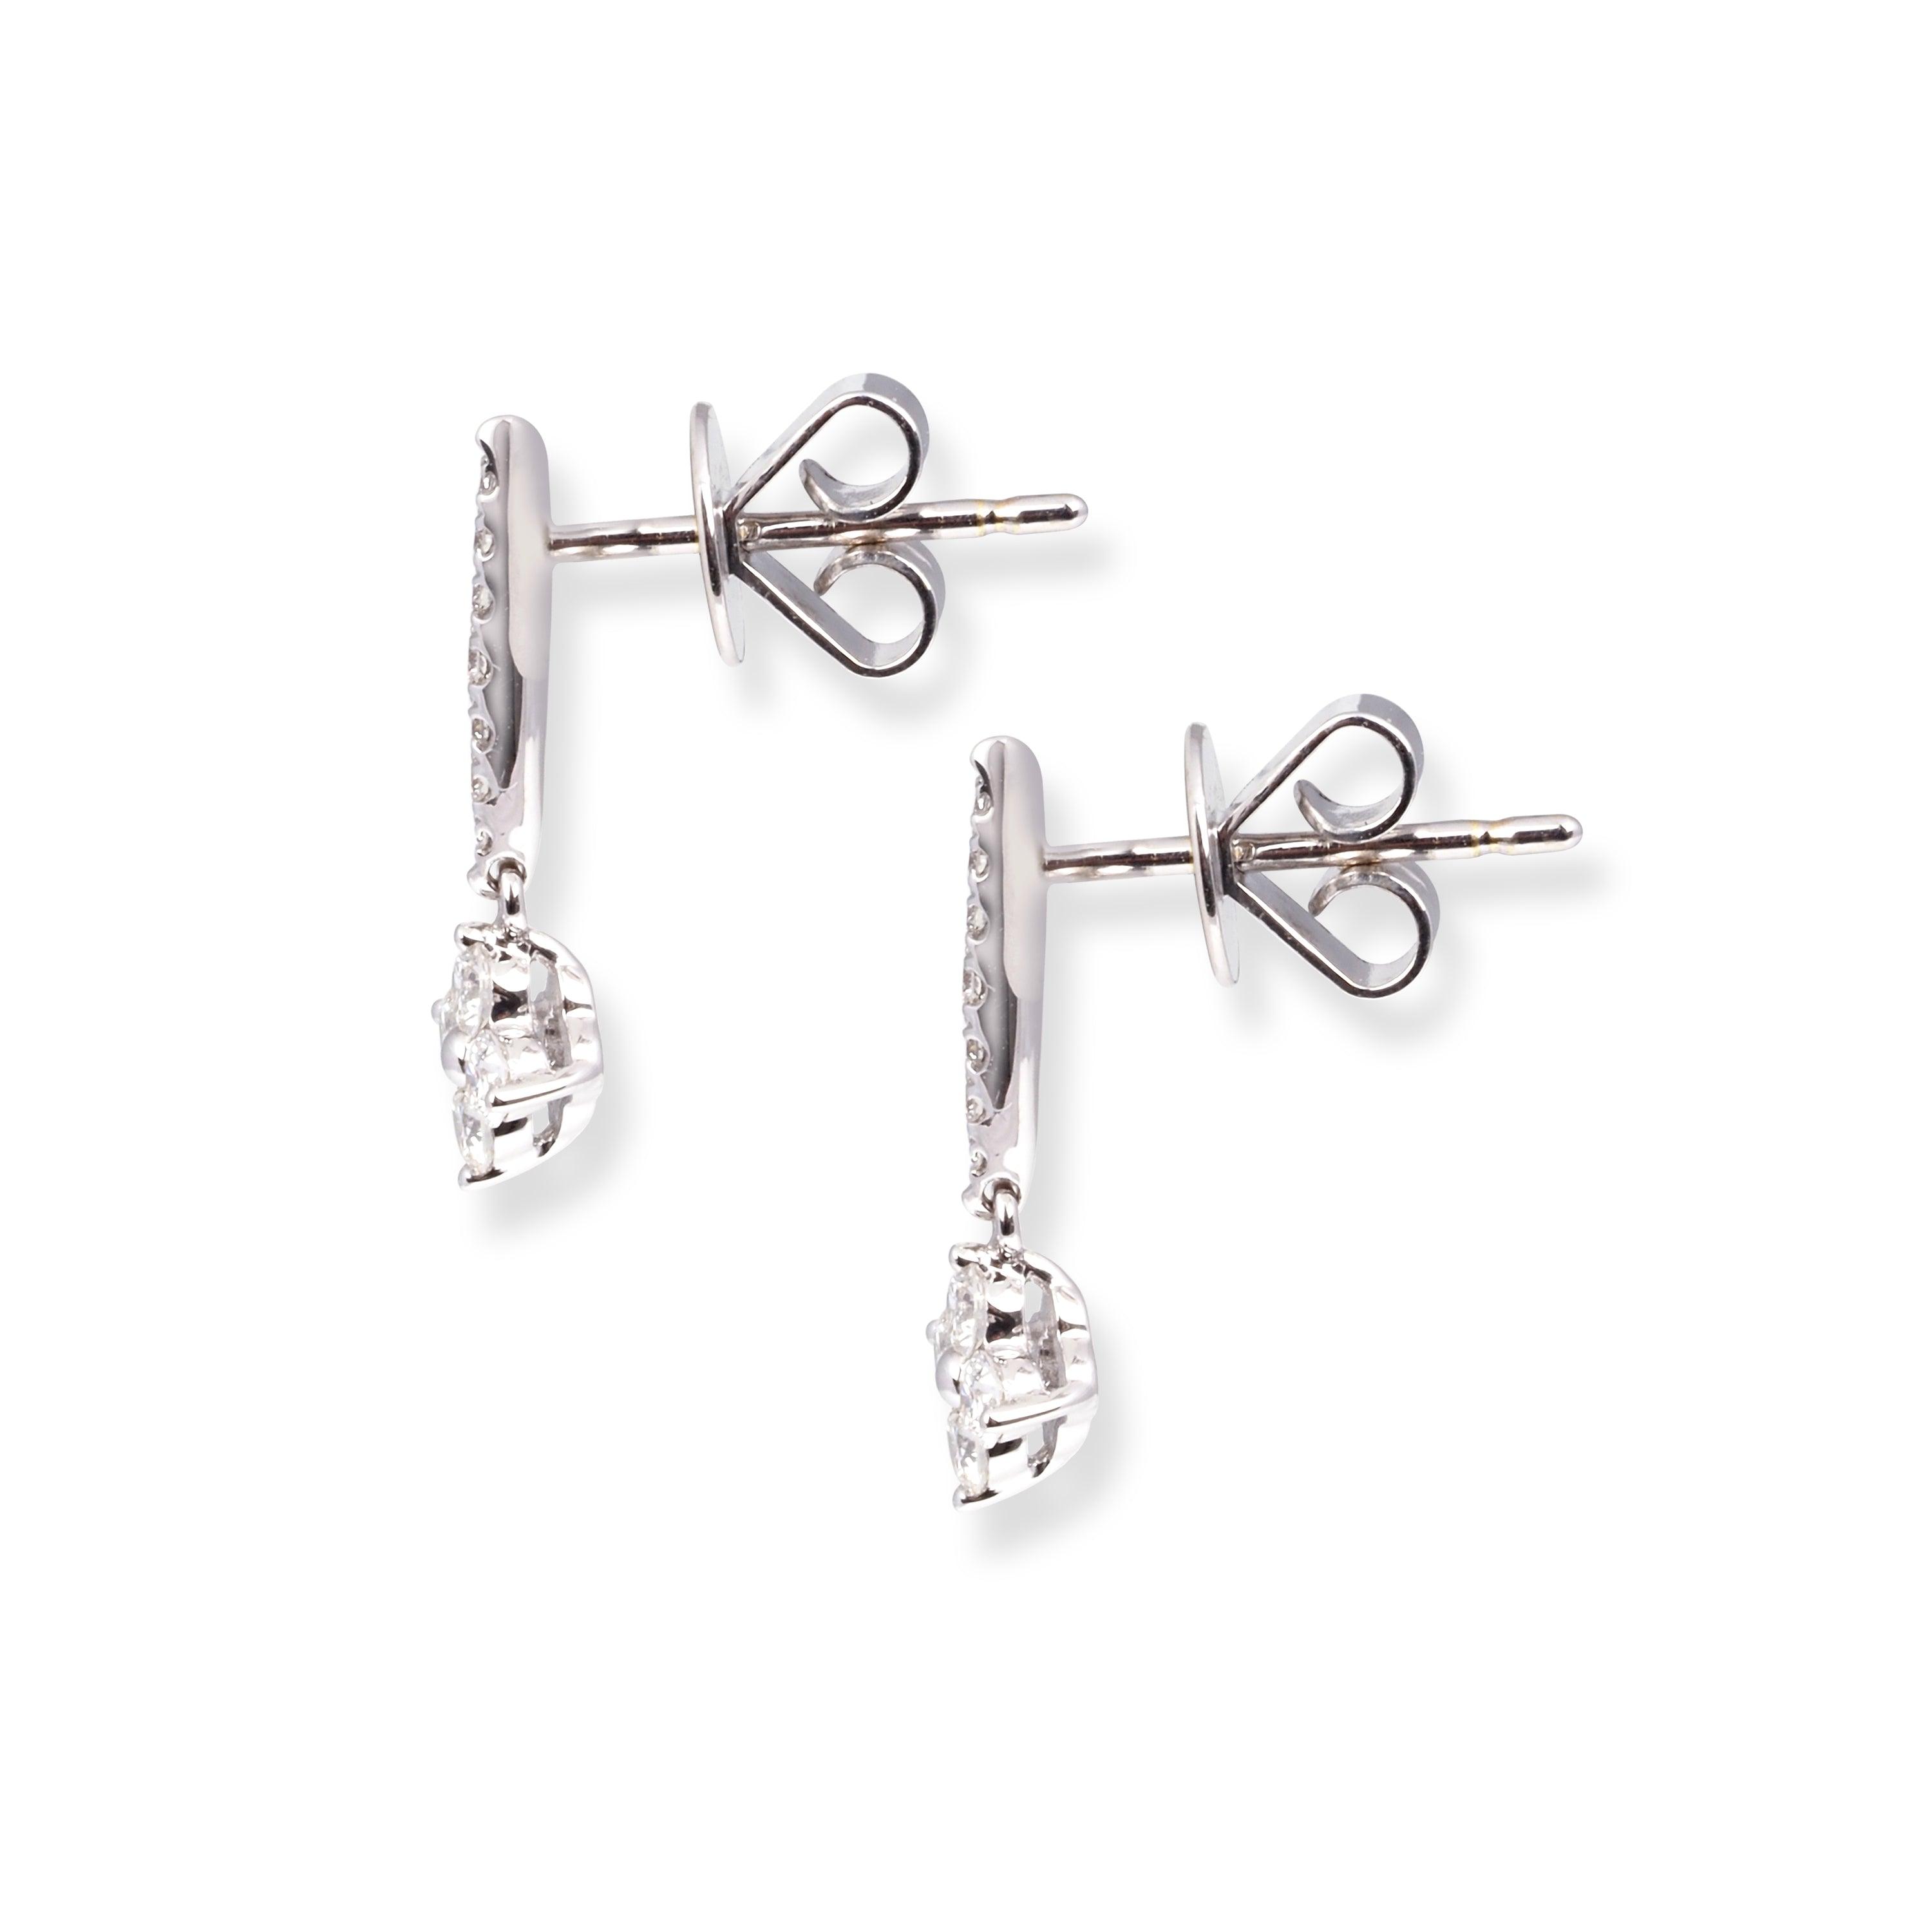 18ct White Gold Diamond Earrings with Drop Design E-7974 - Minar Jewellers